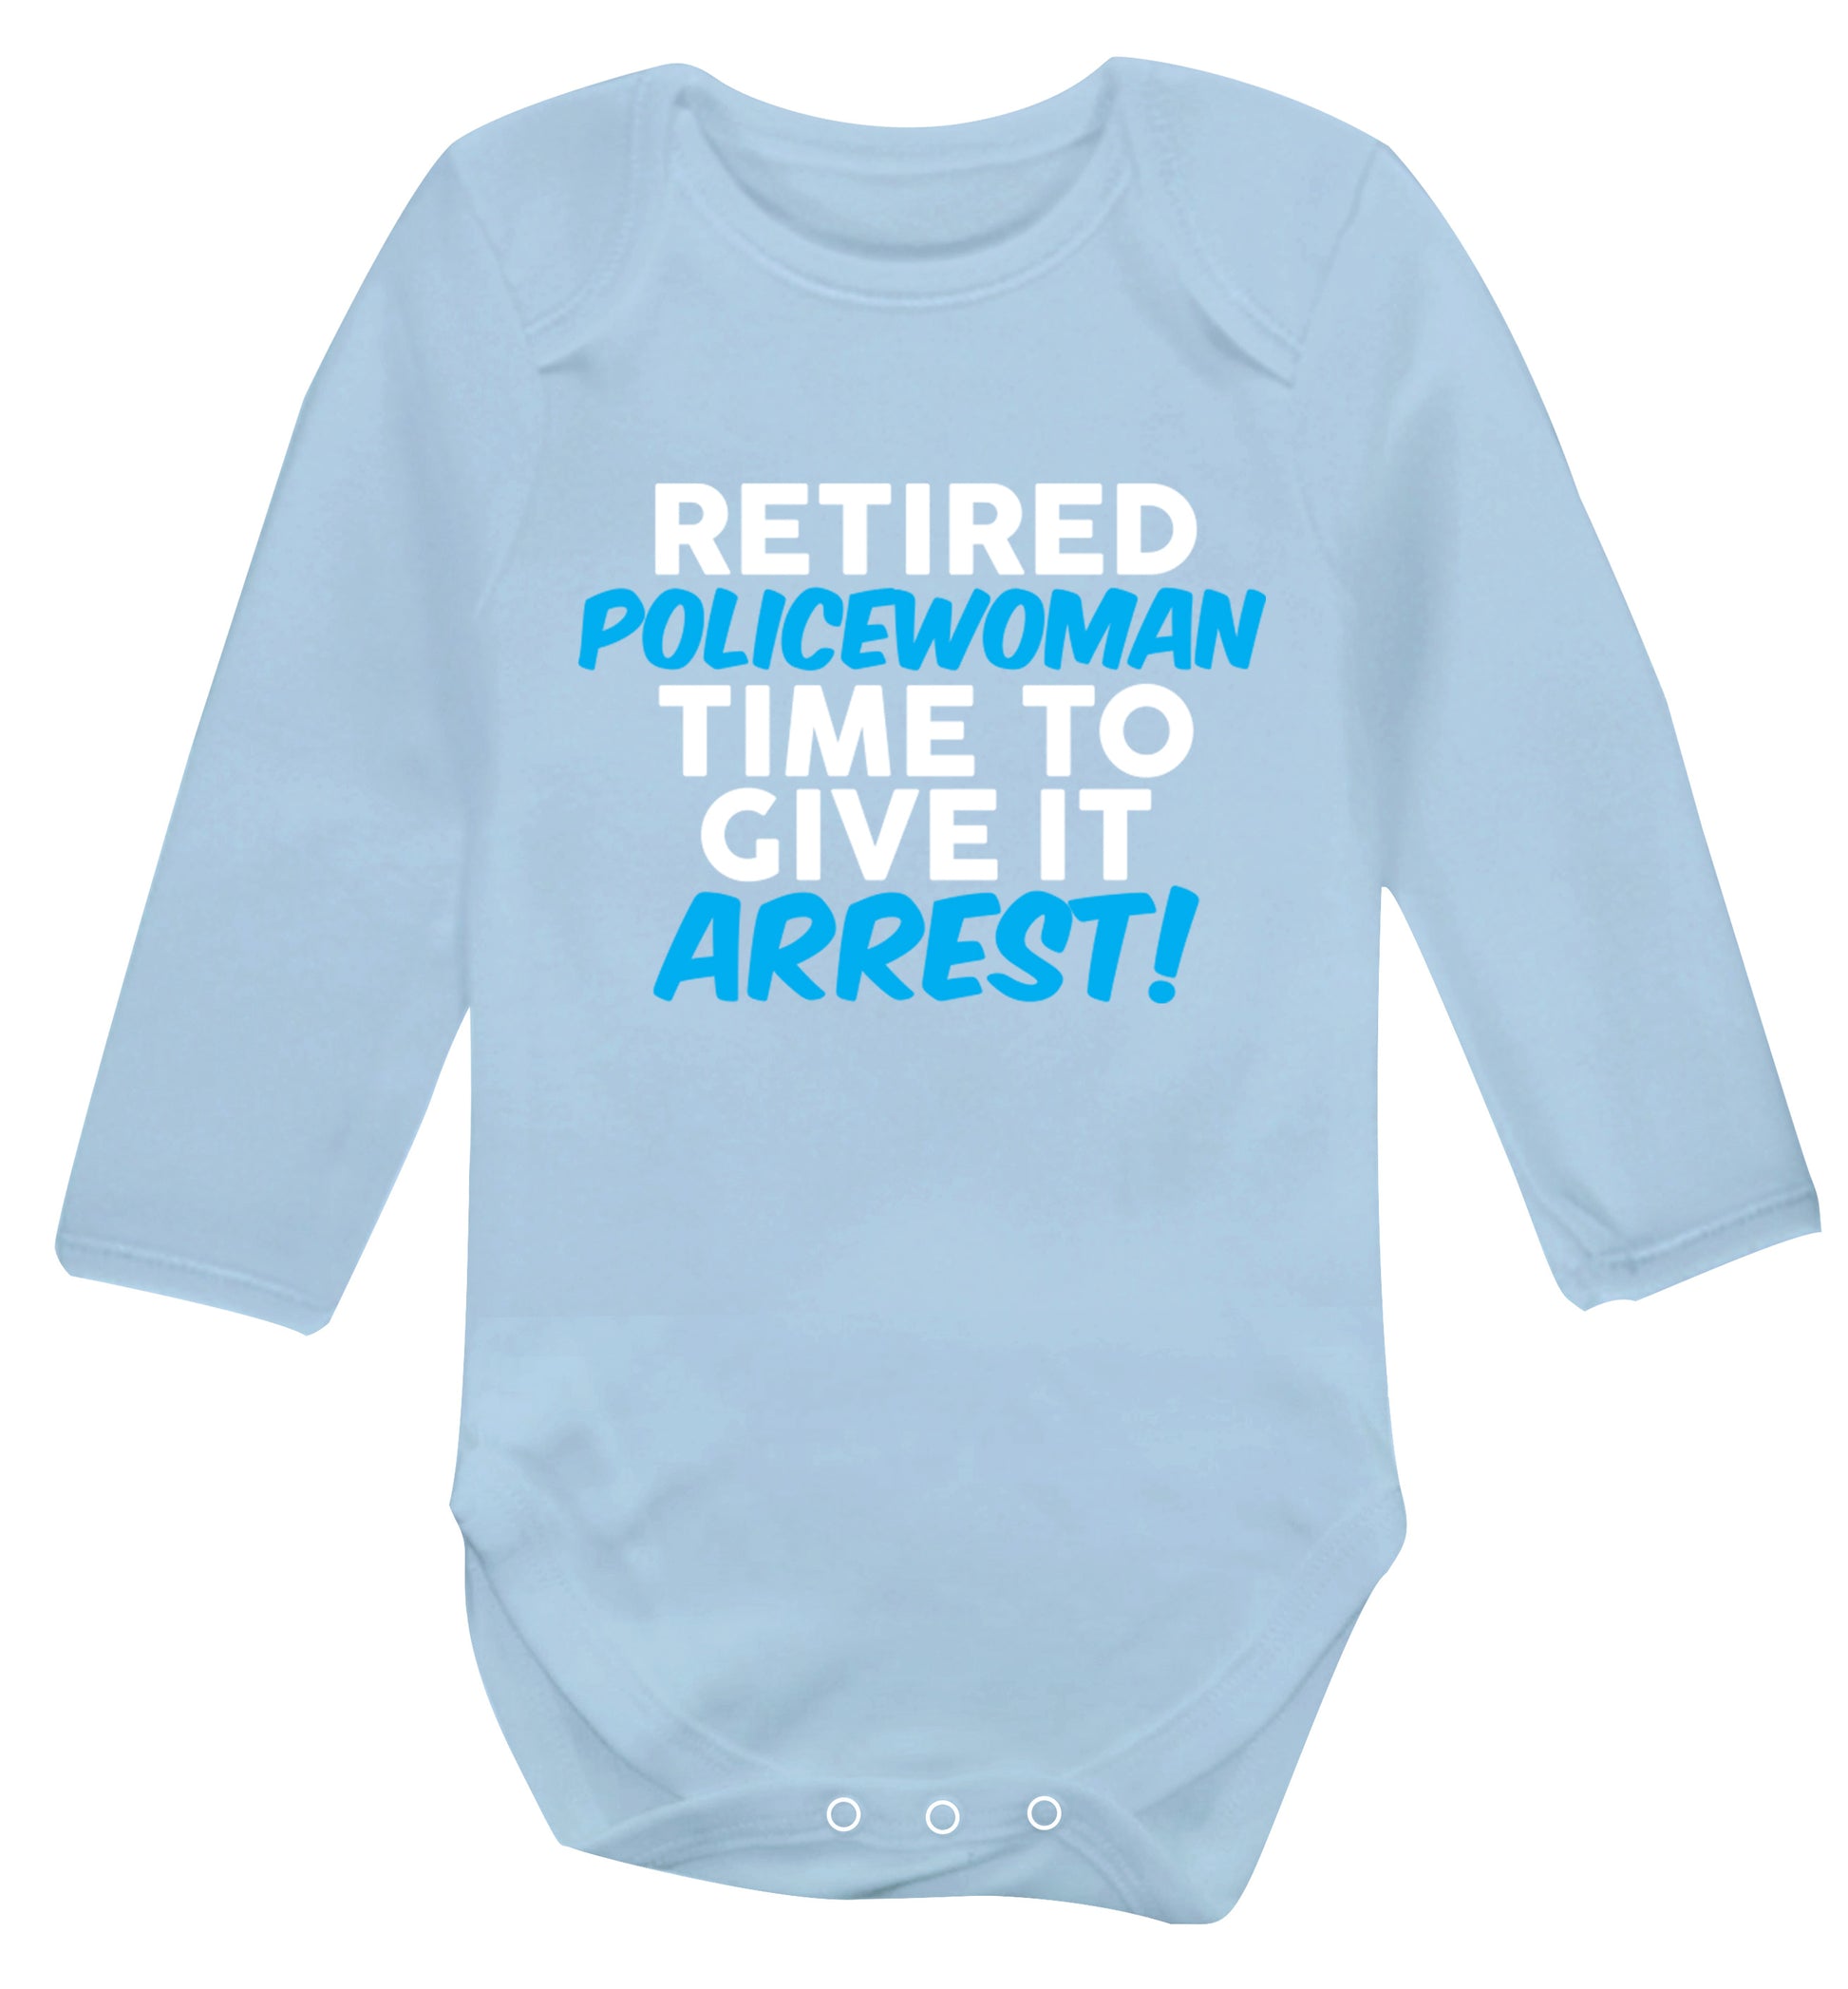 Retired policewoman time to give it arrest Baby Vest long sleeved pale blue 6-12 months